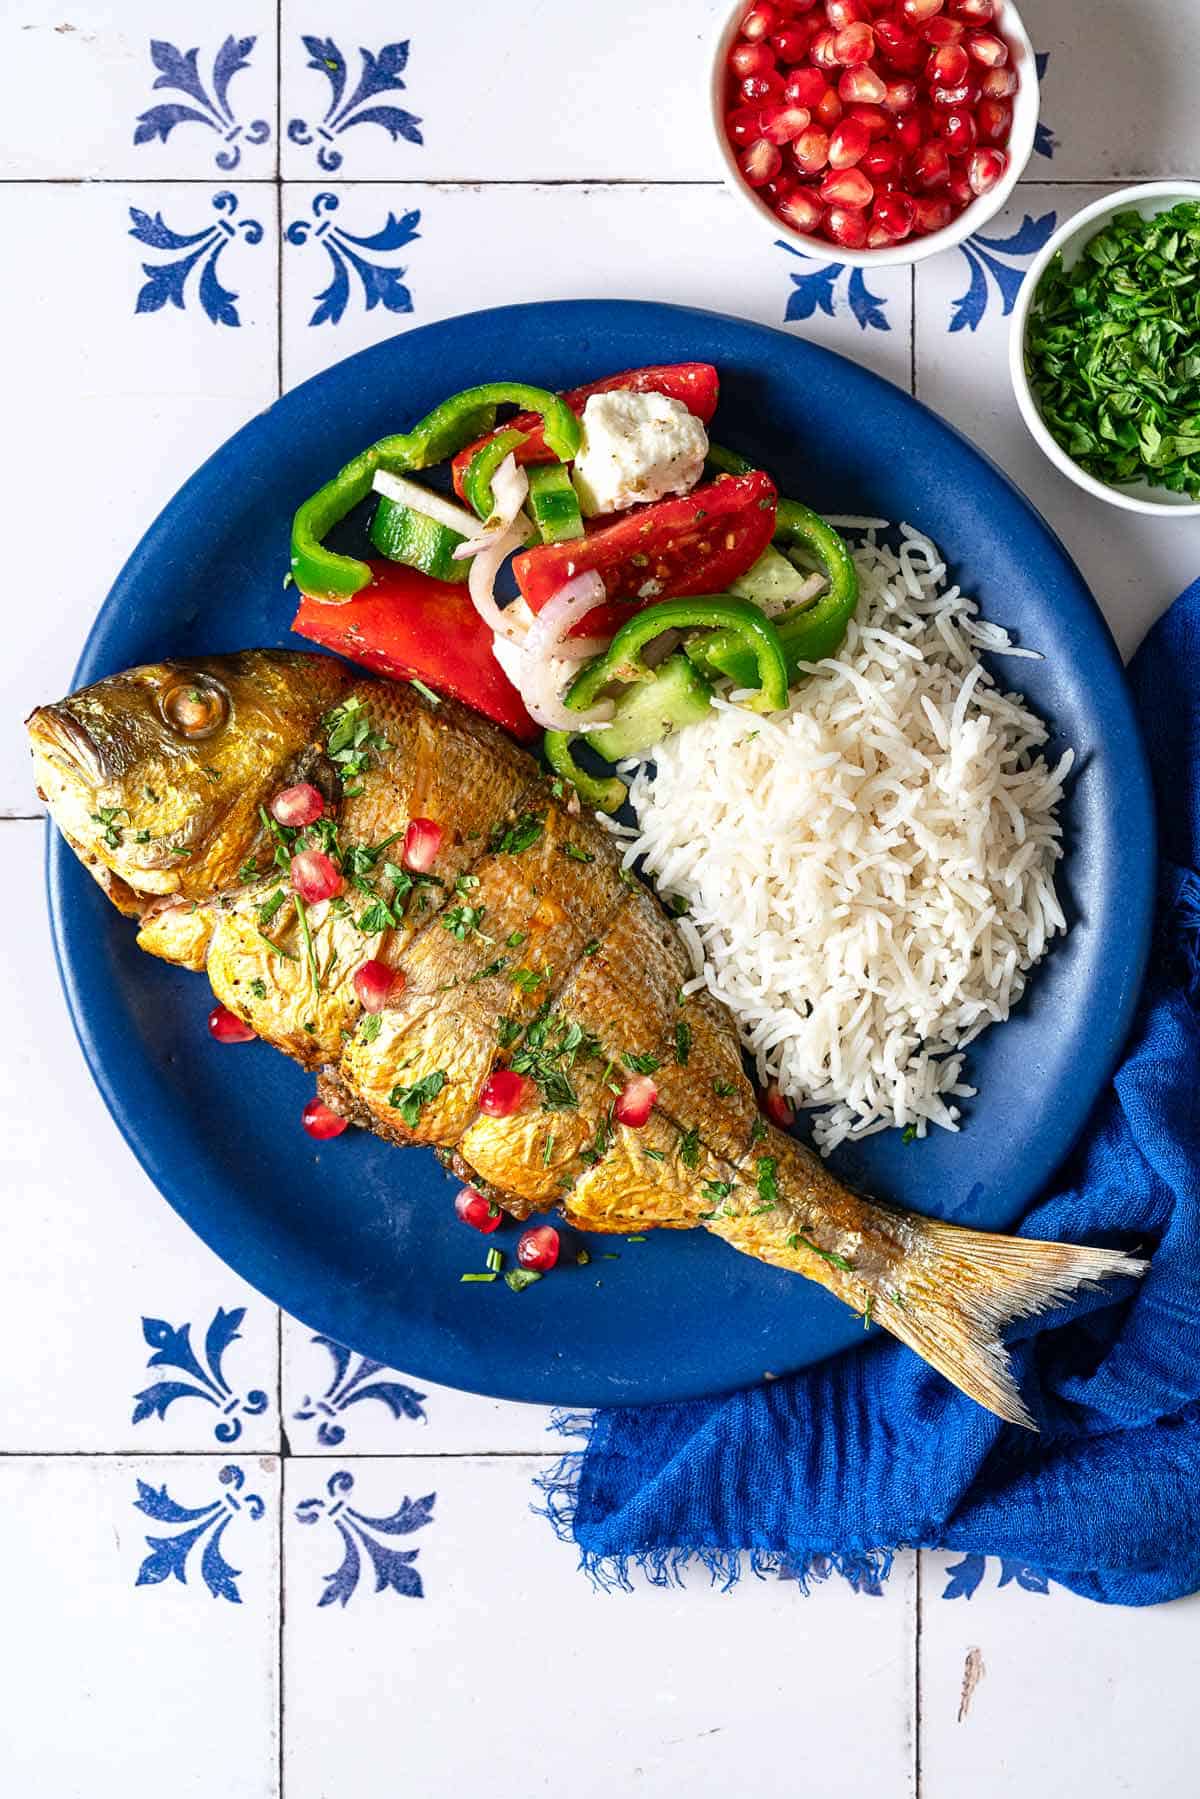 A serving of persian baked fish on a plate with rice and a salad next to small bowls of pomegranate seeds and chopped parsley.